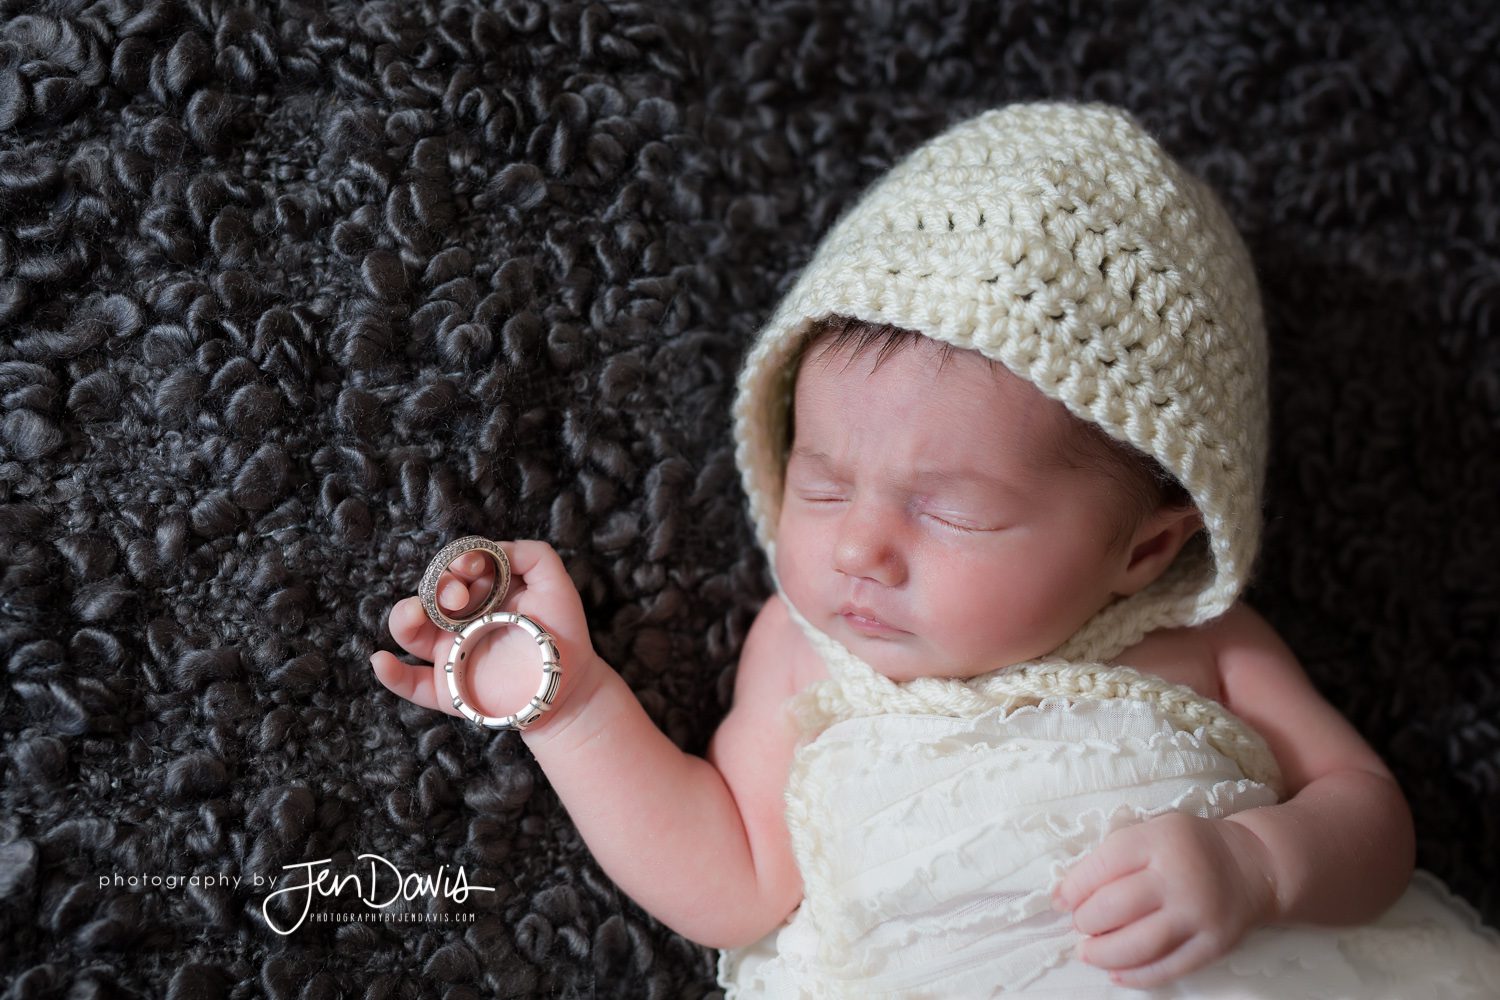 Baby with cream bonnet and wedding rings